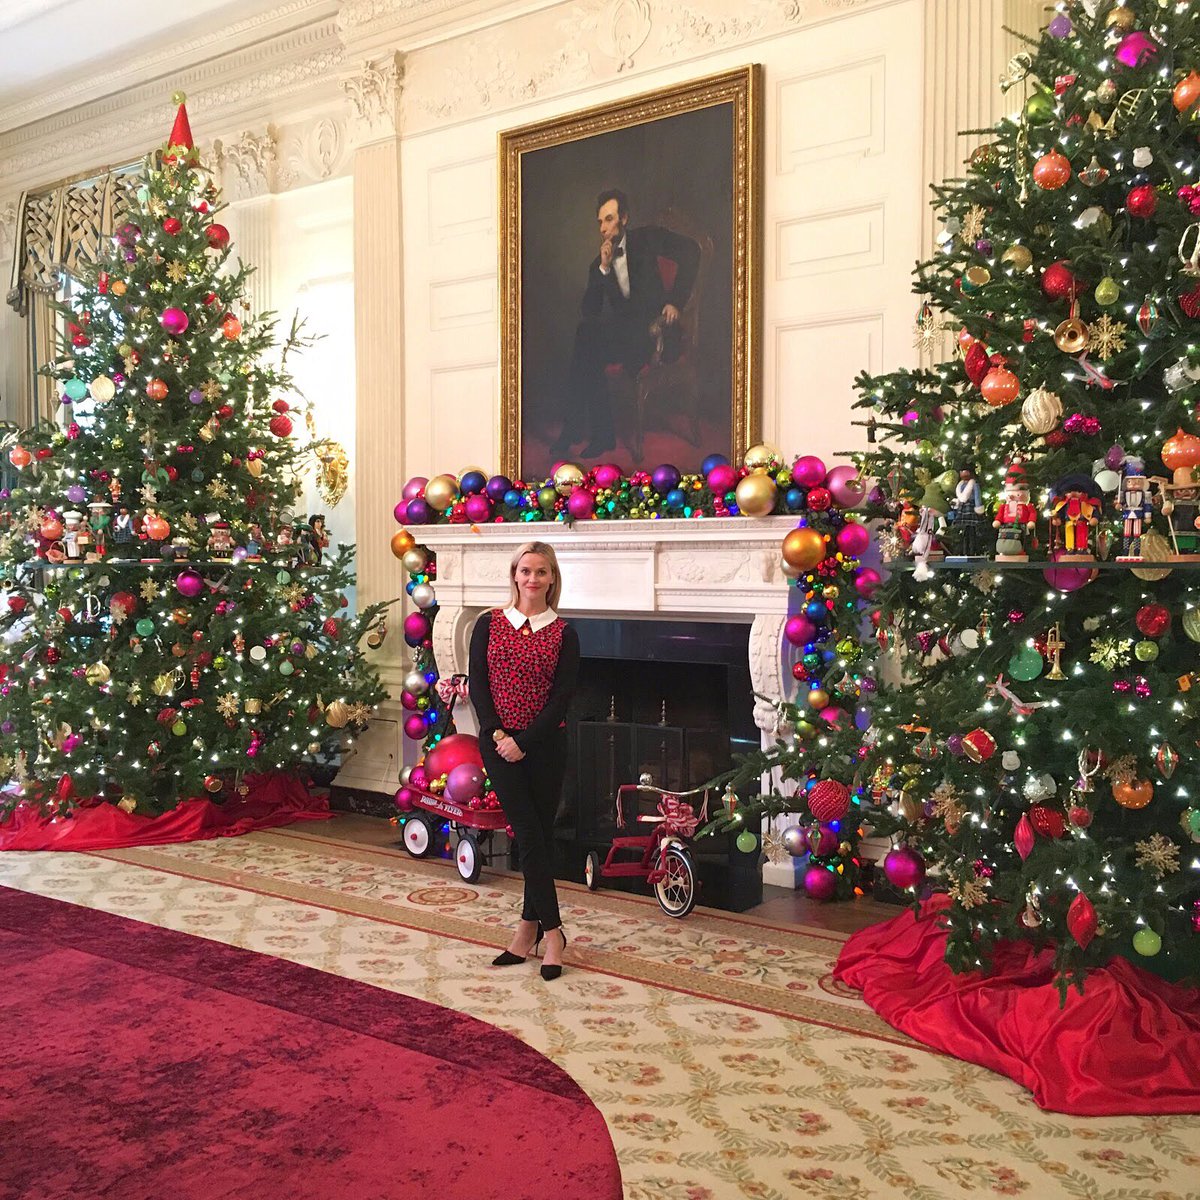 Christmas inspiration: Last year at the #WhiteHouse! A beautiful display of color and sparkle ????❤️ #TBT https://t.co/KQ2UrXuWKE